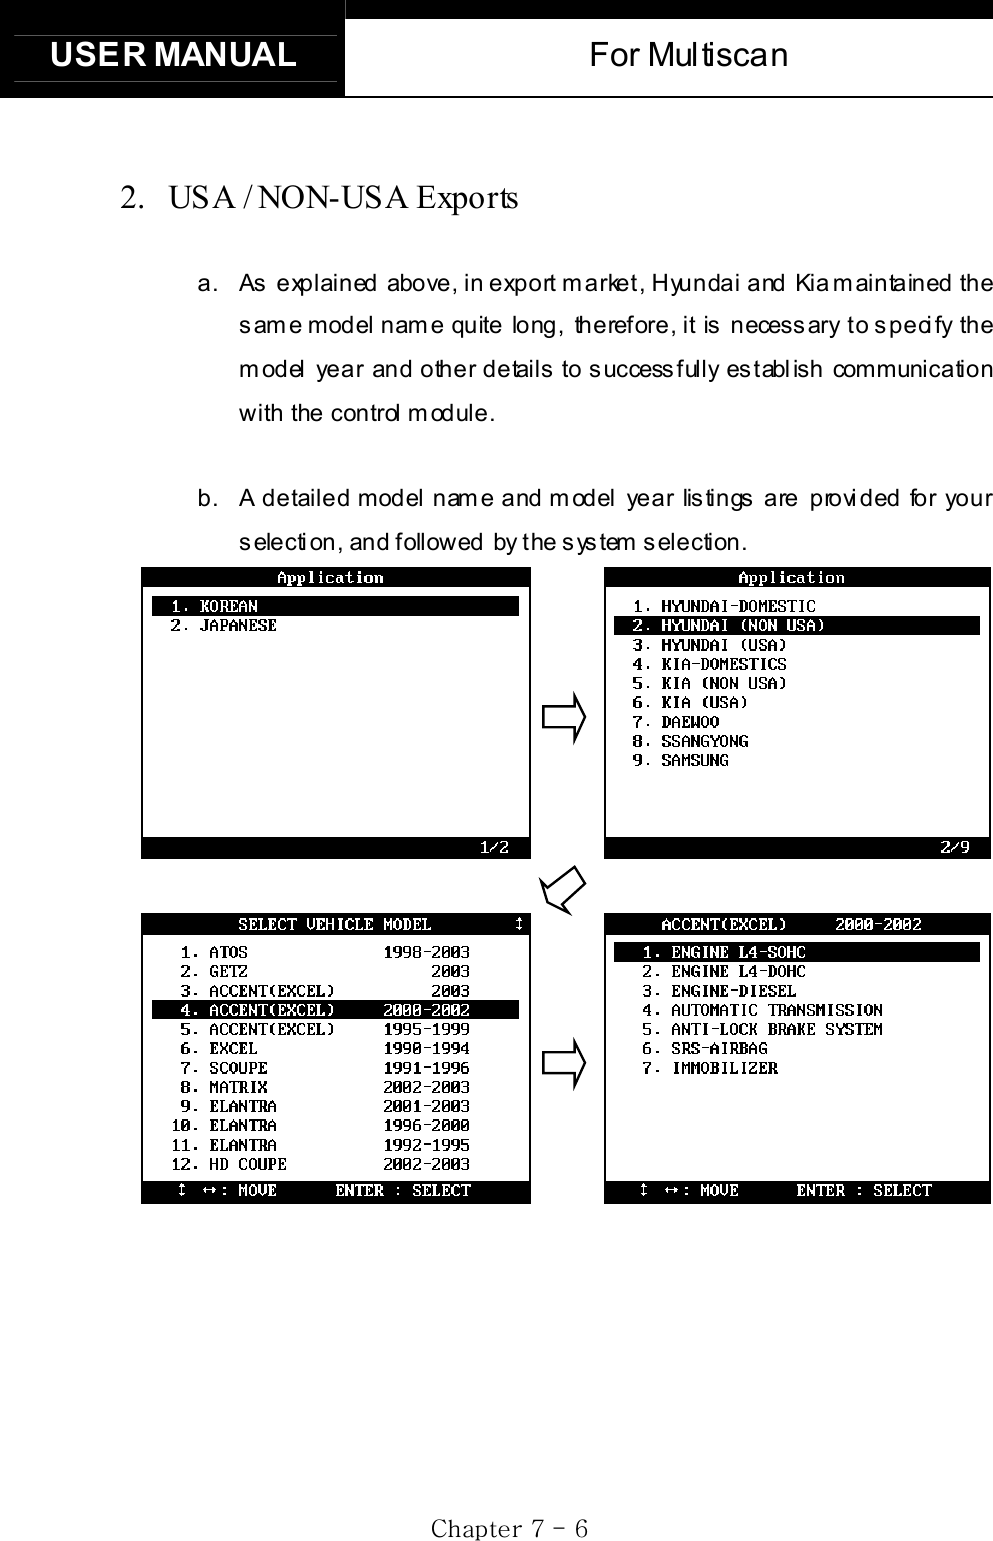 USER MANUAL  For Multiscan GjG^GTG ]G2.  USA / NON-US A Exports a.  As explained above, in export market, Hyundai and Kia maintained the same model name quite long, therefore, it is necessary to specify the model year and other details to successfully establish communication with the control module. b.  A detailed model name and model year listings are provided for your s electi on, and followed by t he s ys tem  s election.             